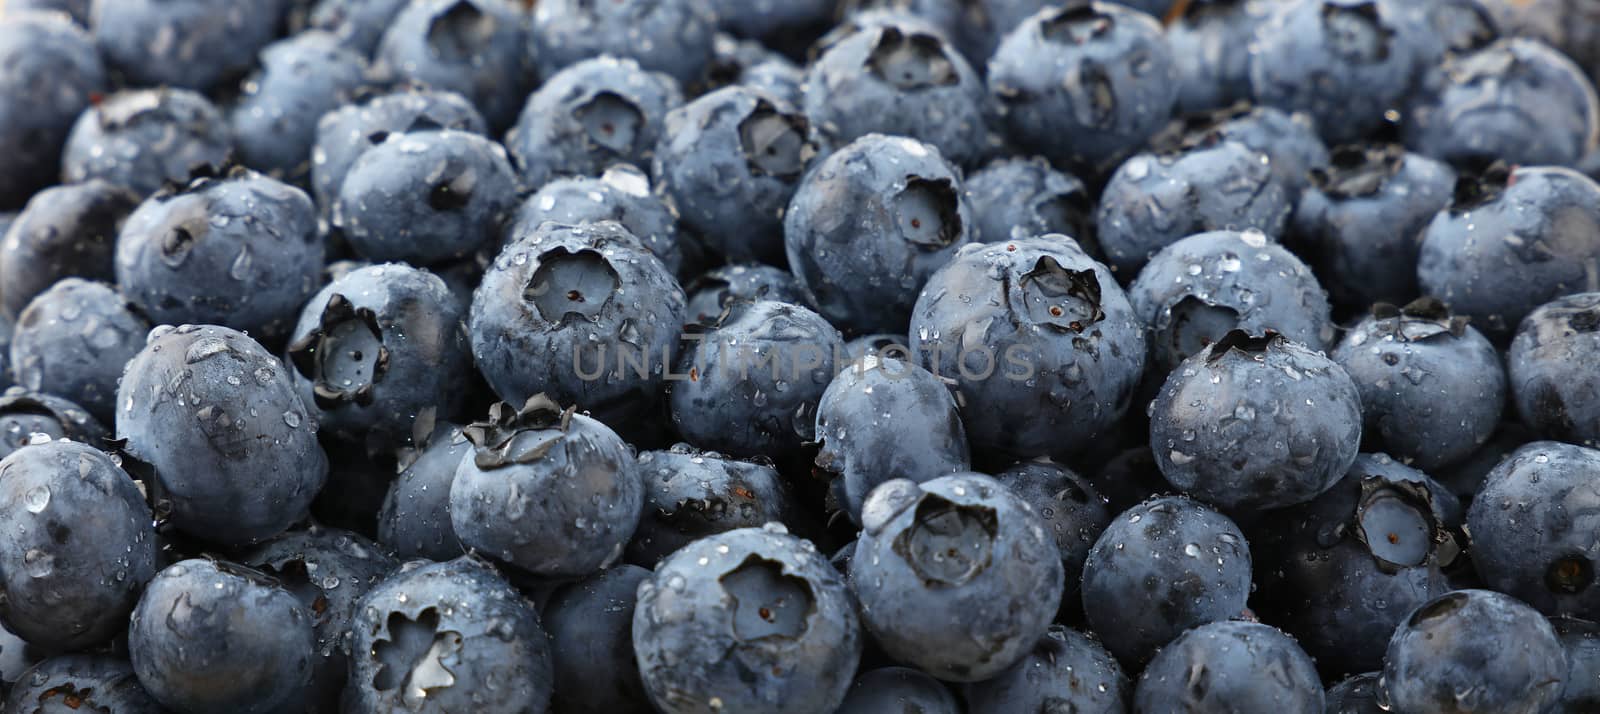 Background pattern of fresh washed blueberry berries wet with water drops, close up, low angle view, selective focus